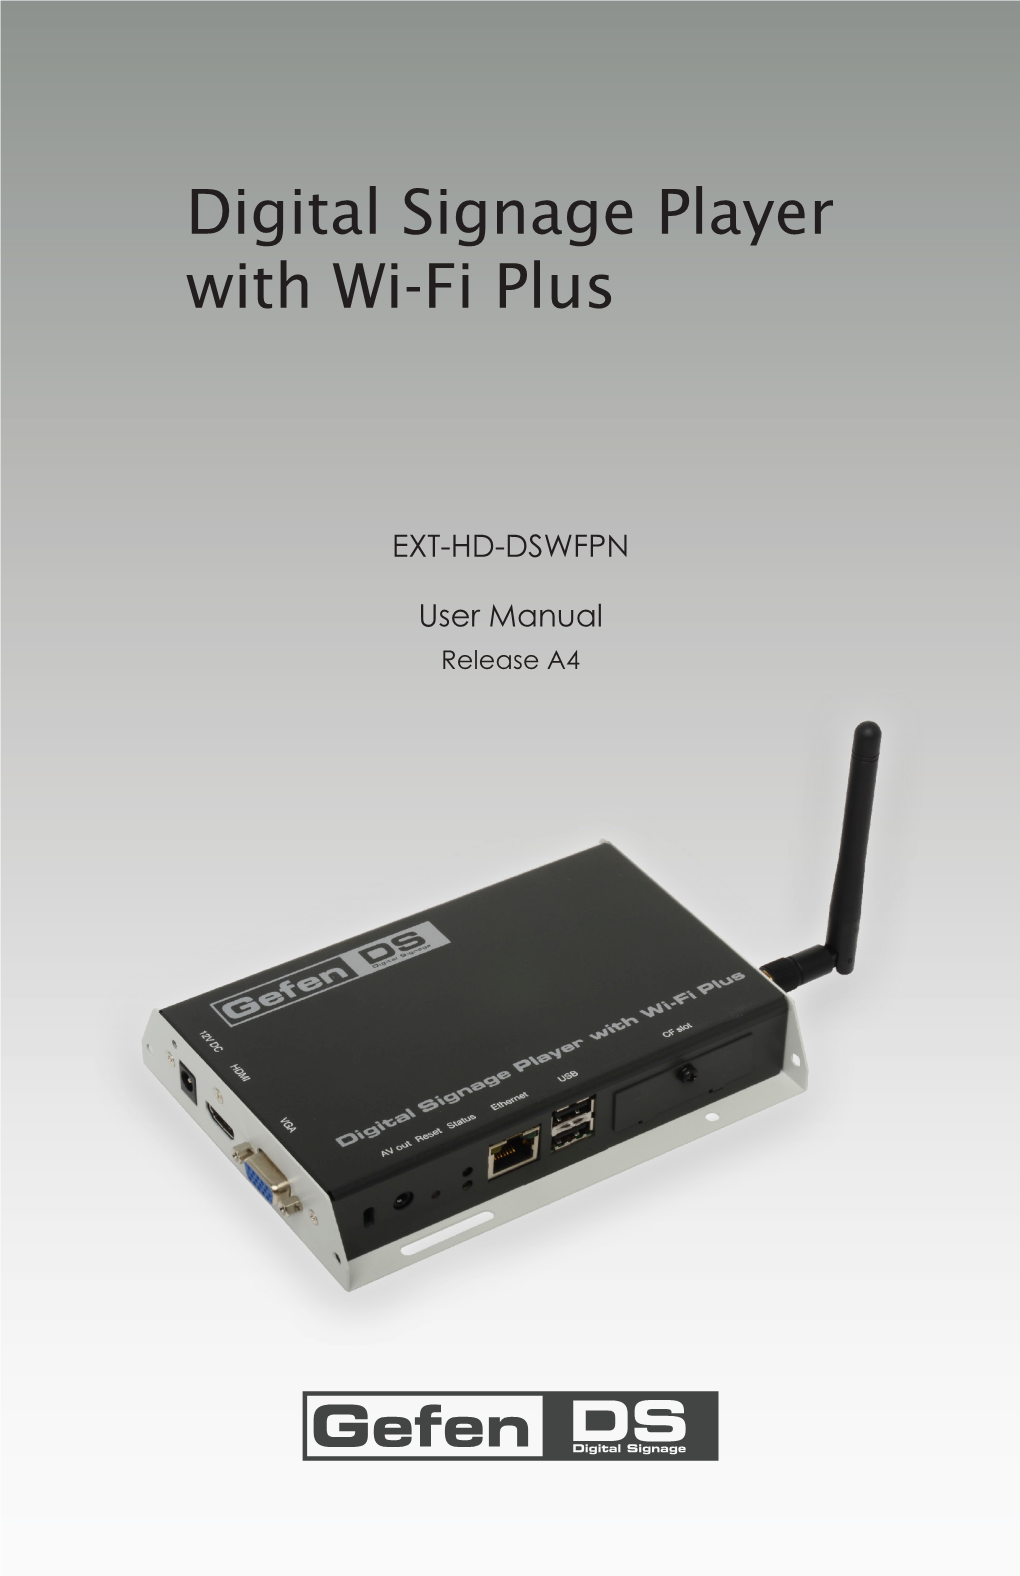 Digital Signage Player with Wi-Fi Plus